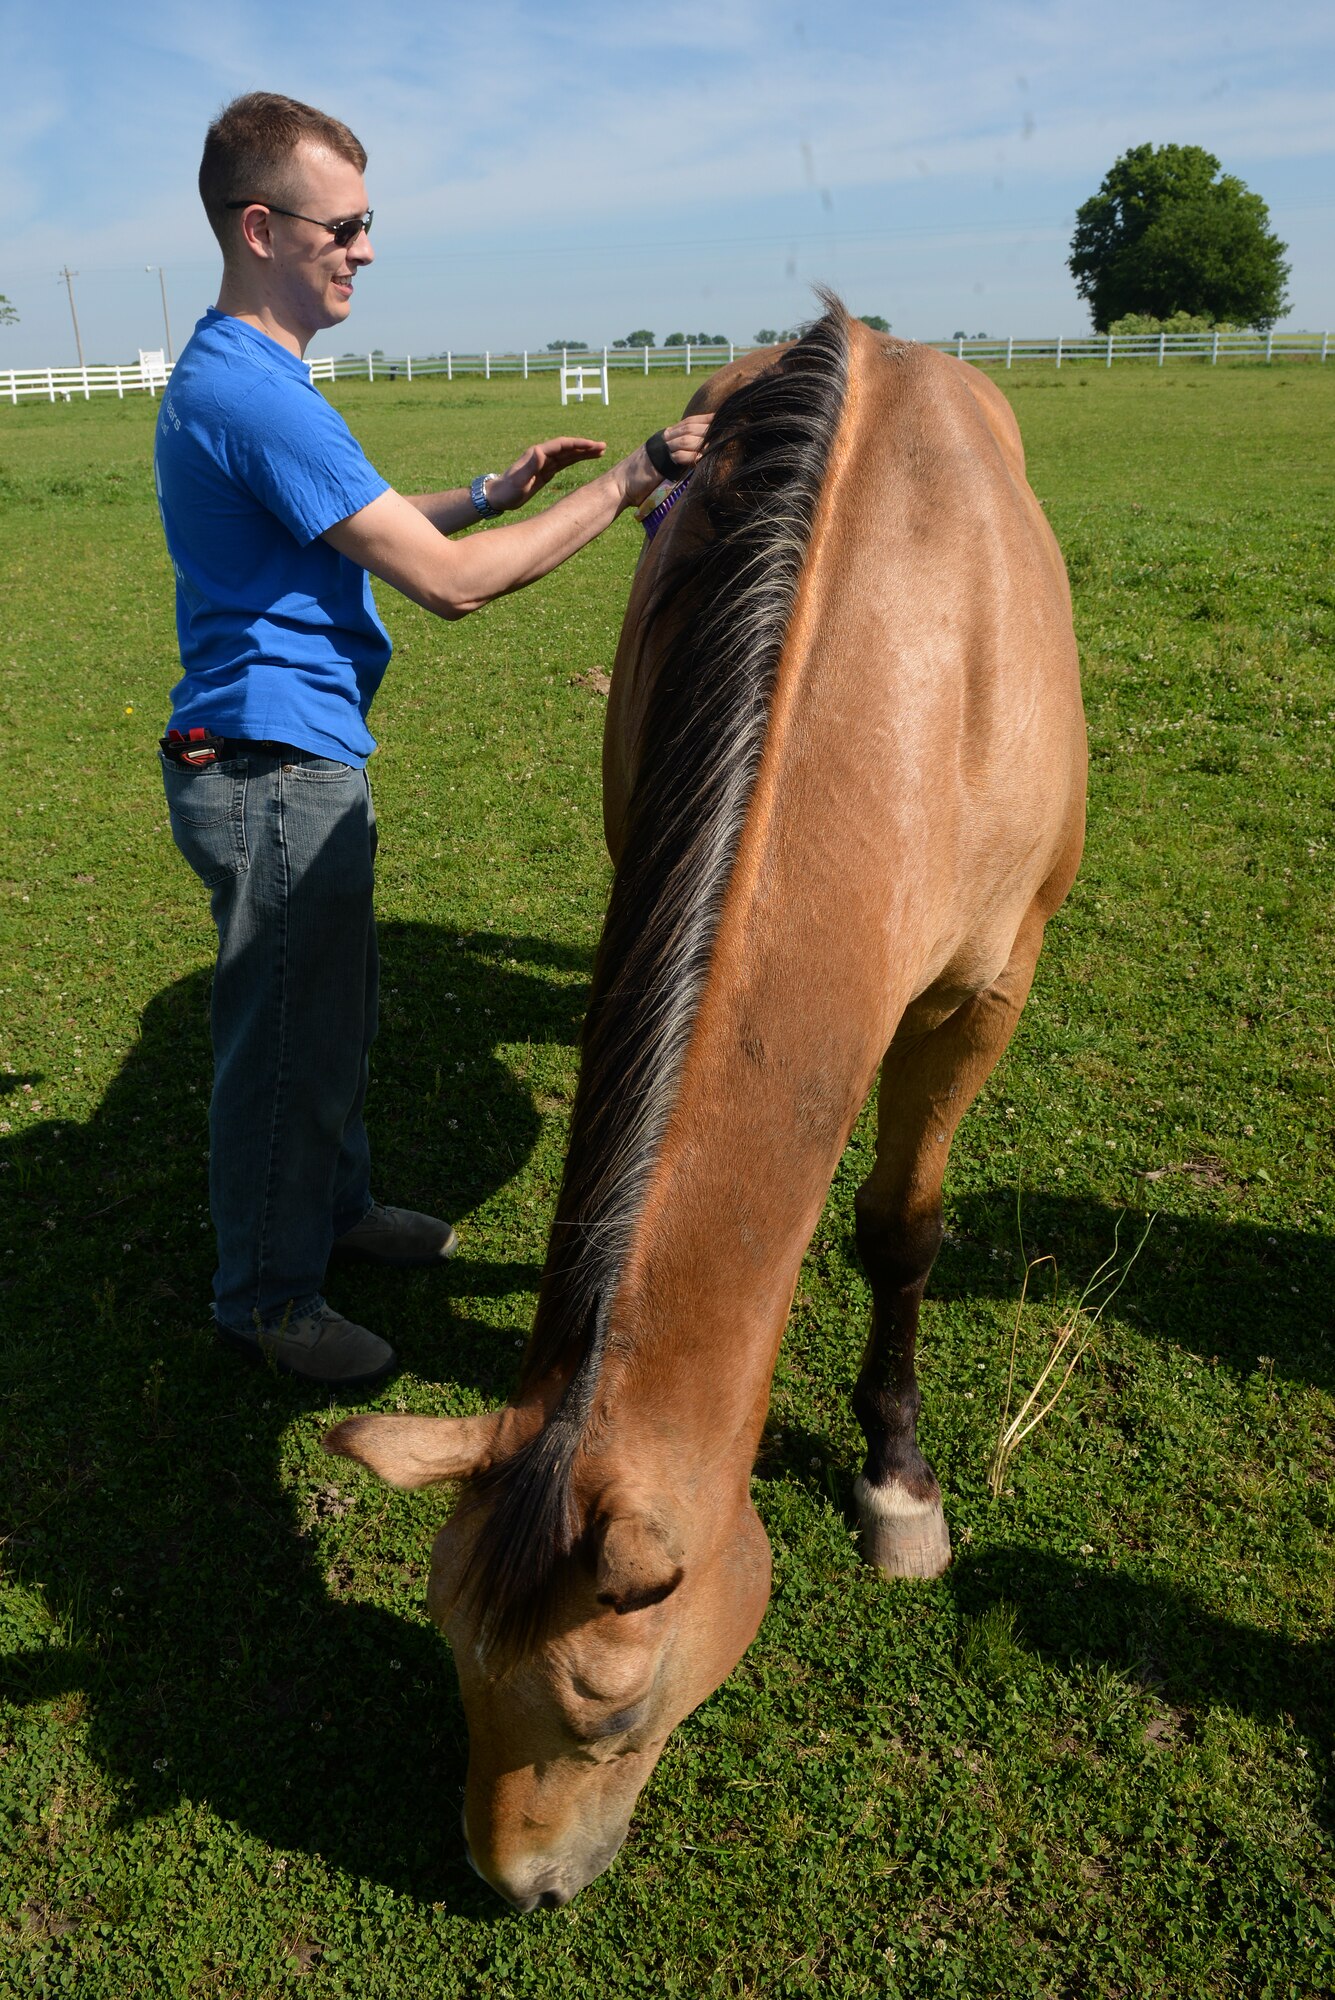 Senior Airman Anthony Carmignani, 375th Operations Support Squadron Air Traffic Controller, brushes one of the nine horses at Chakota, a therapeutic horseback riding center, Germantown, Illinois, May 28, 2015. He is part of a group of Airmen that gave their time to assist with making Chakota a better place for riders and their families. (U.S. Air Force photo by Airman 1st Class Erica Holbert-Siebert)